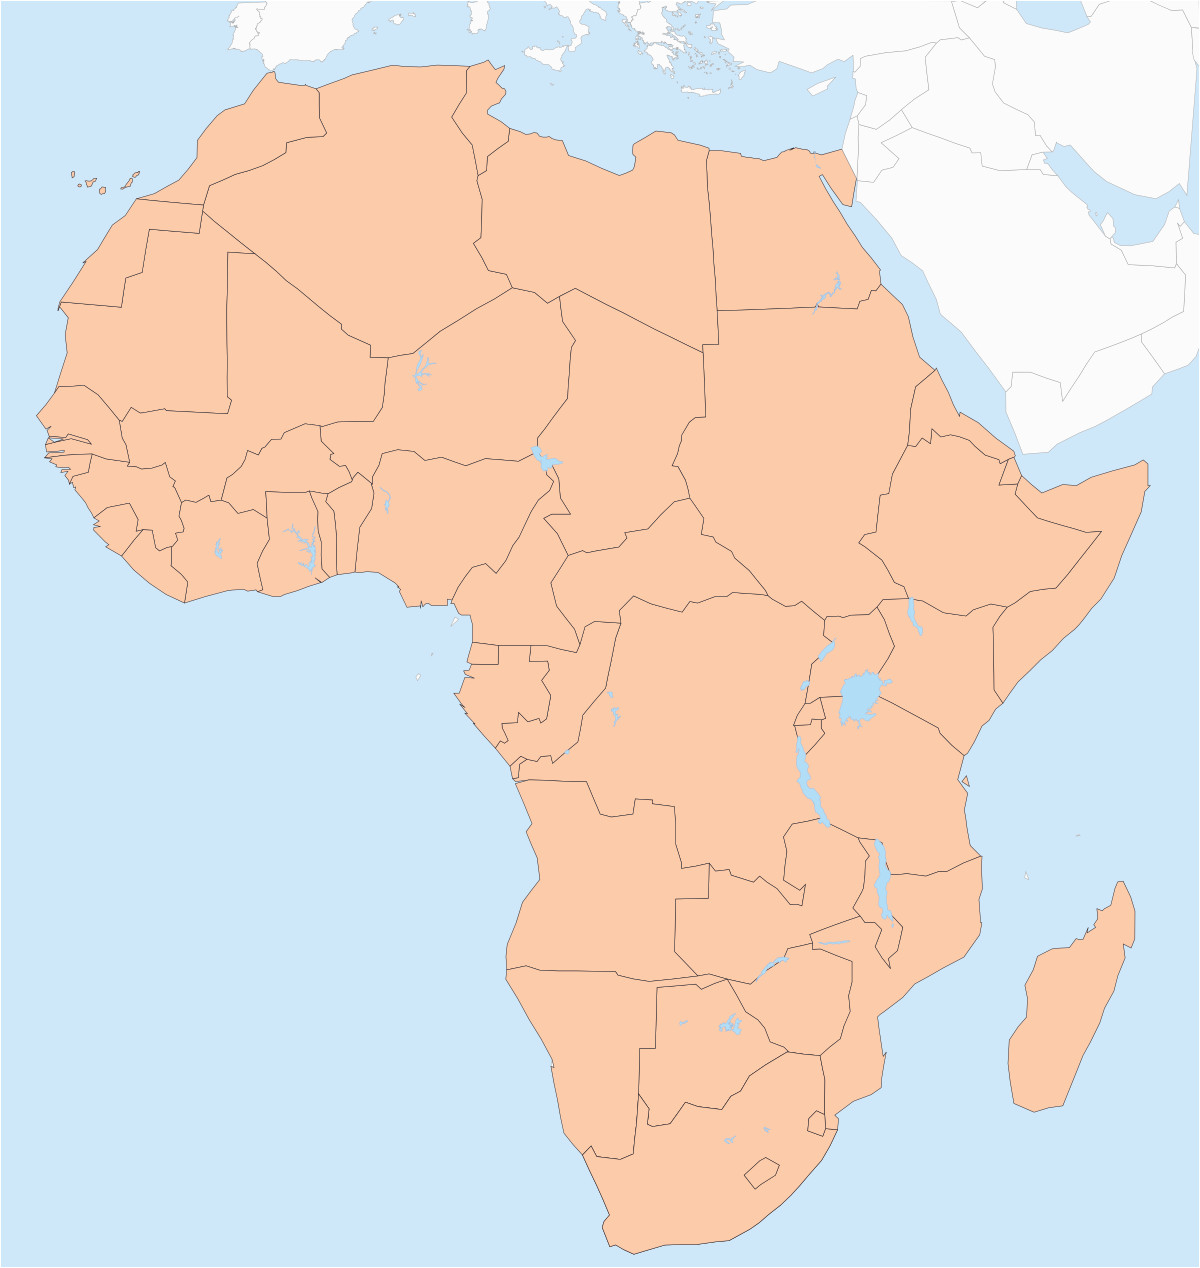 map of africa with labels jackenjuul